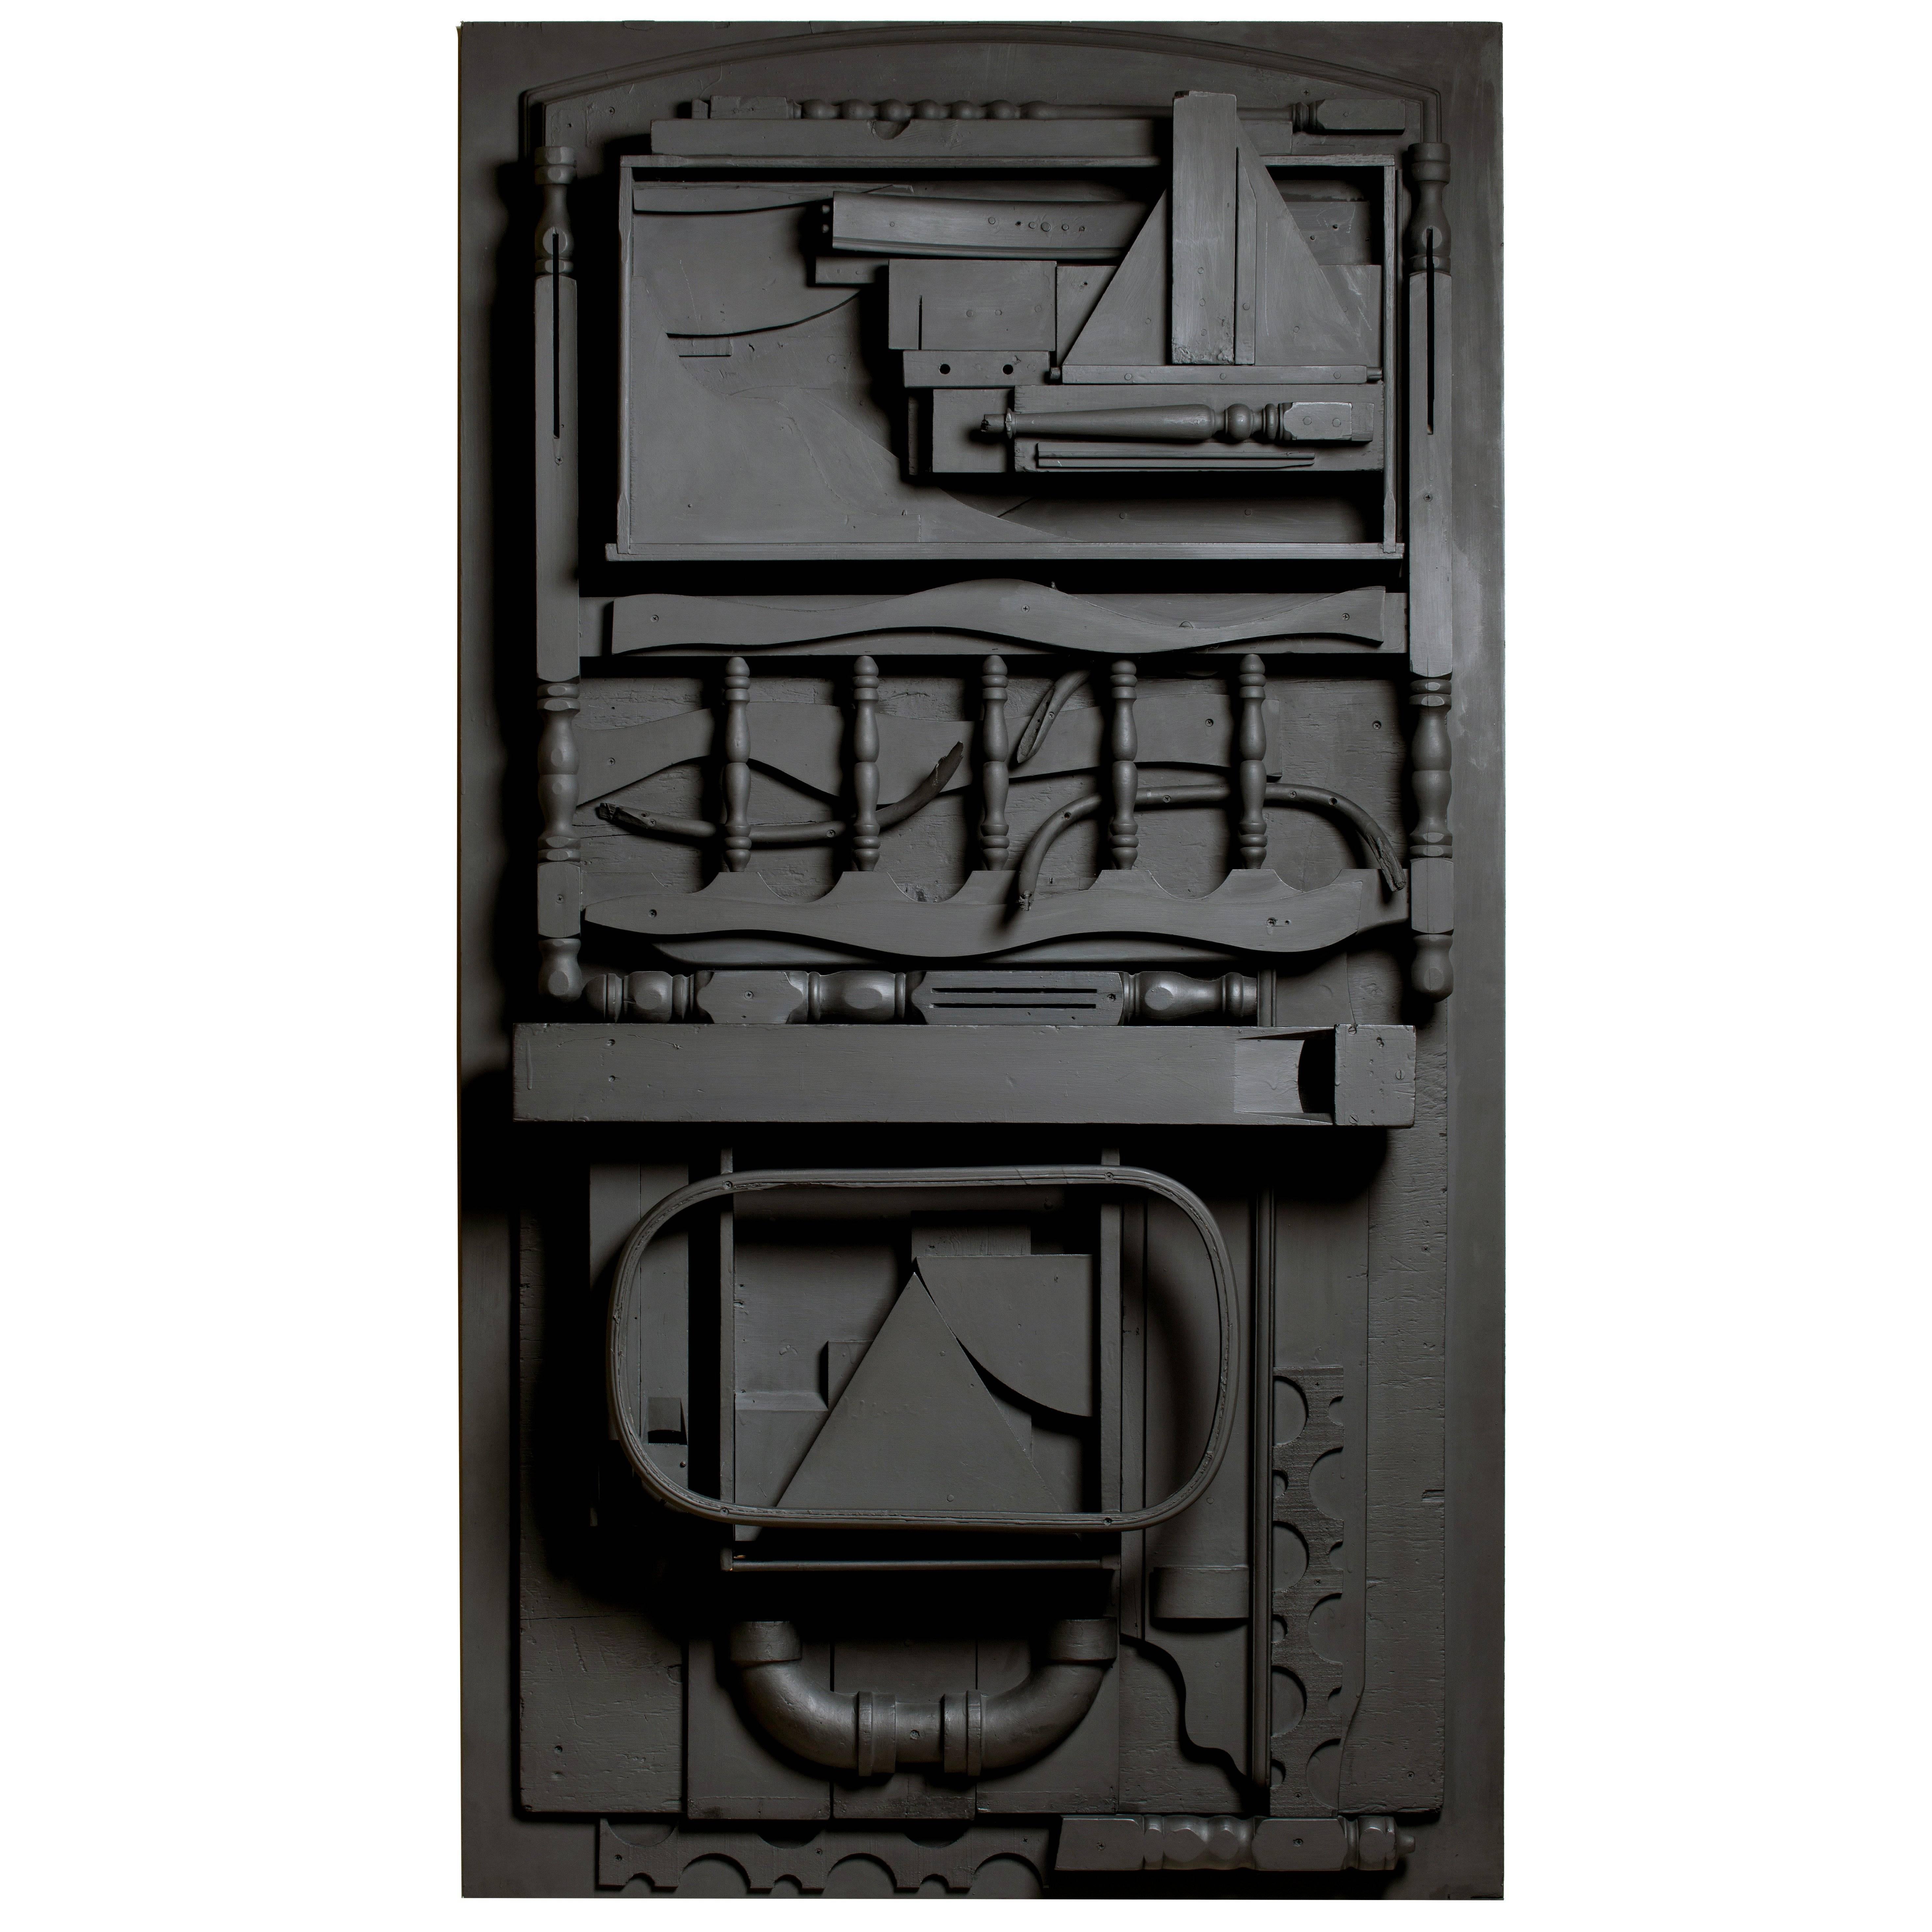 What did Louise Nevelson use to make her sculptures?